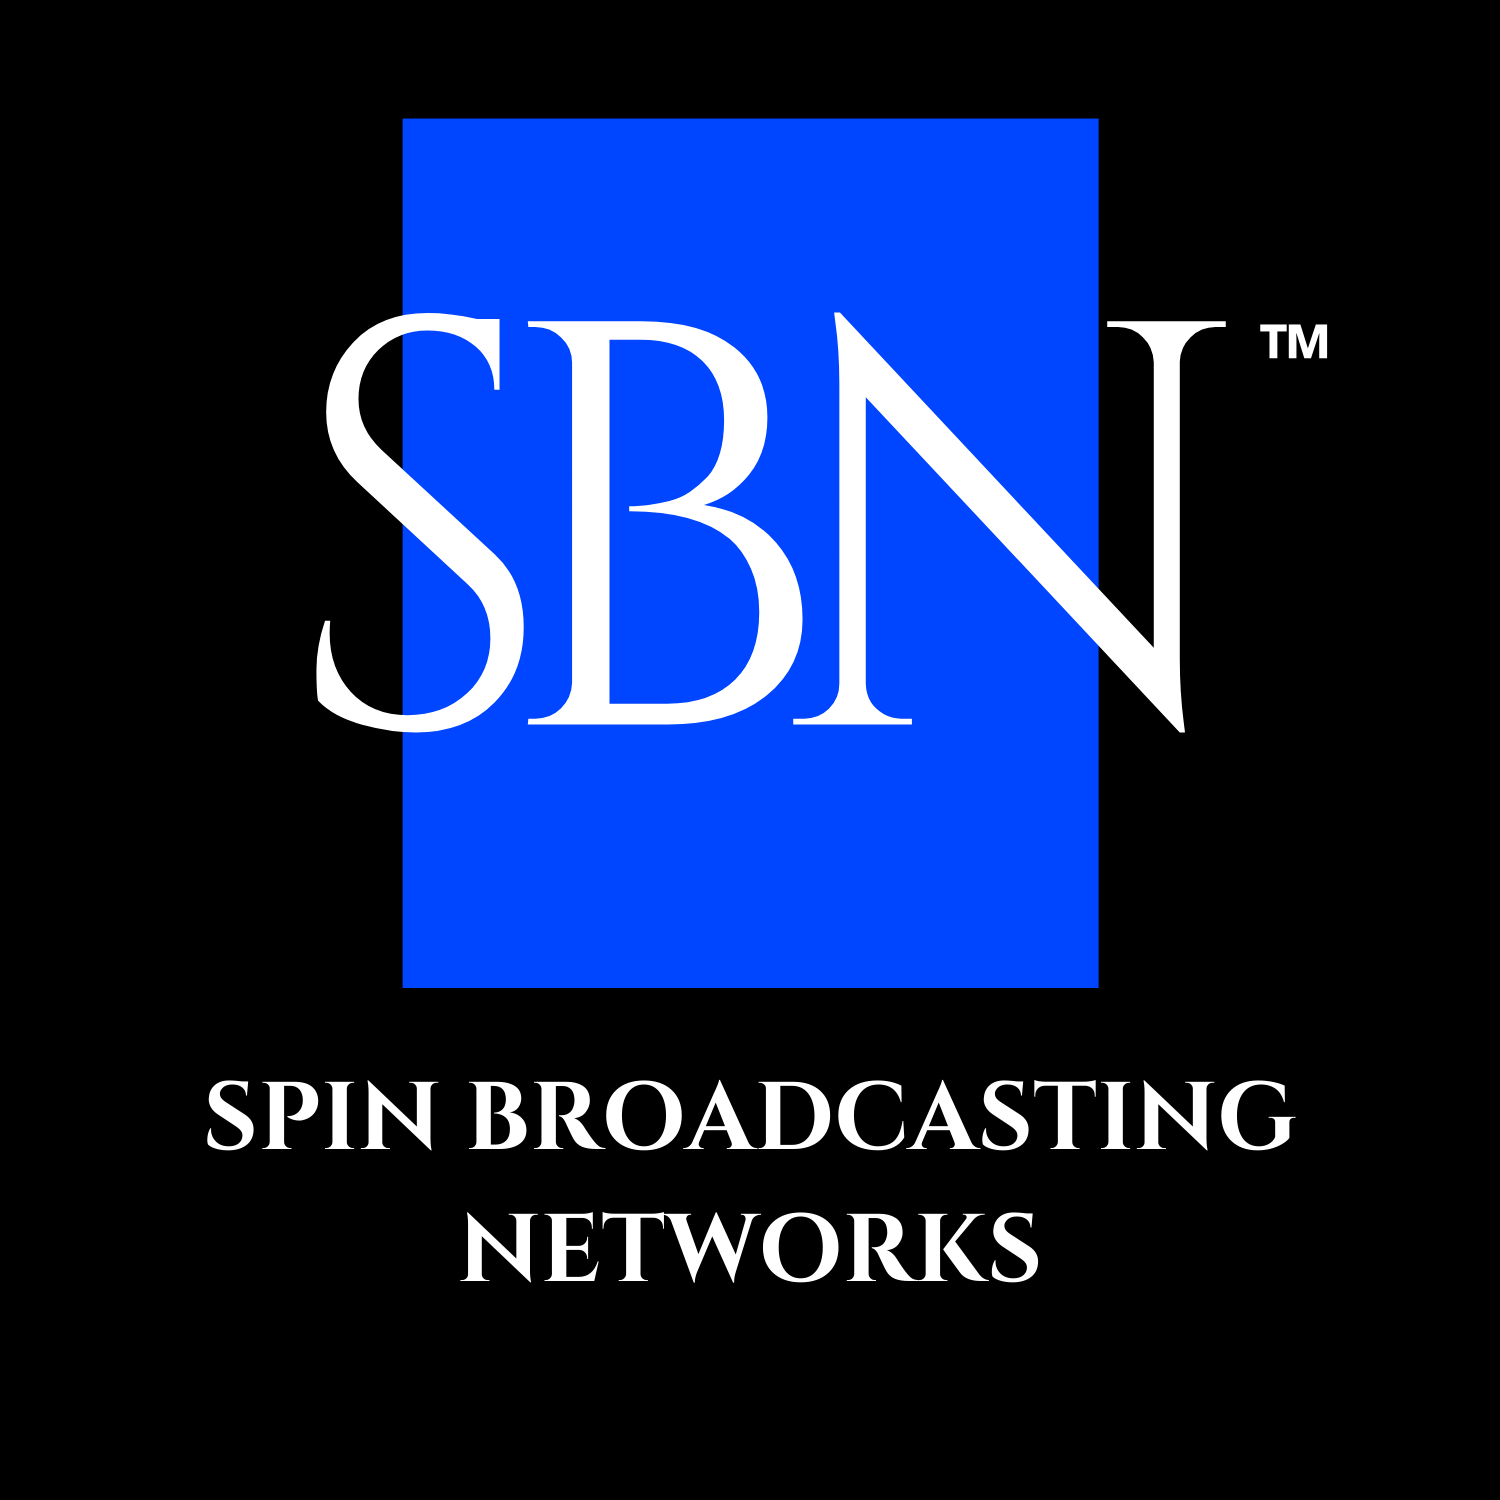 The SPiN Broadcasting Network